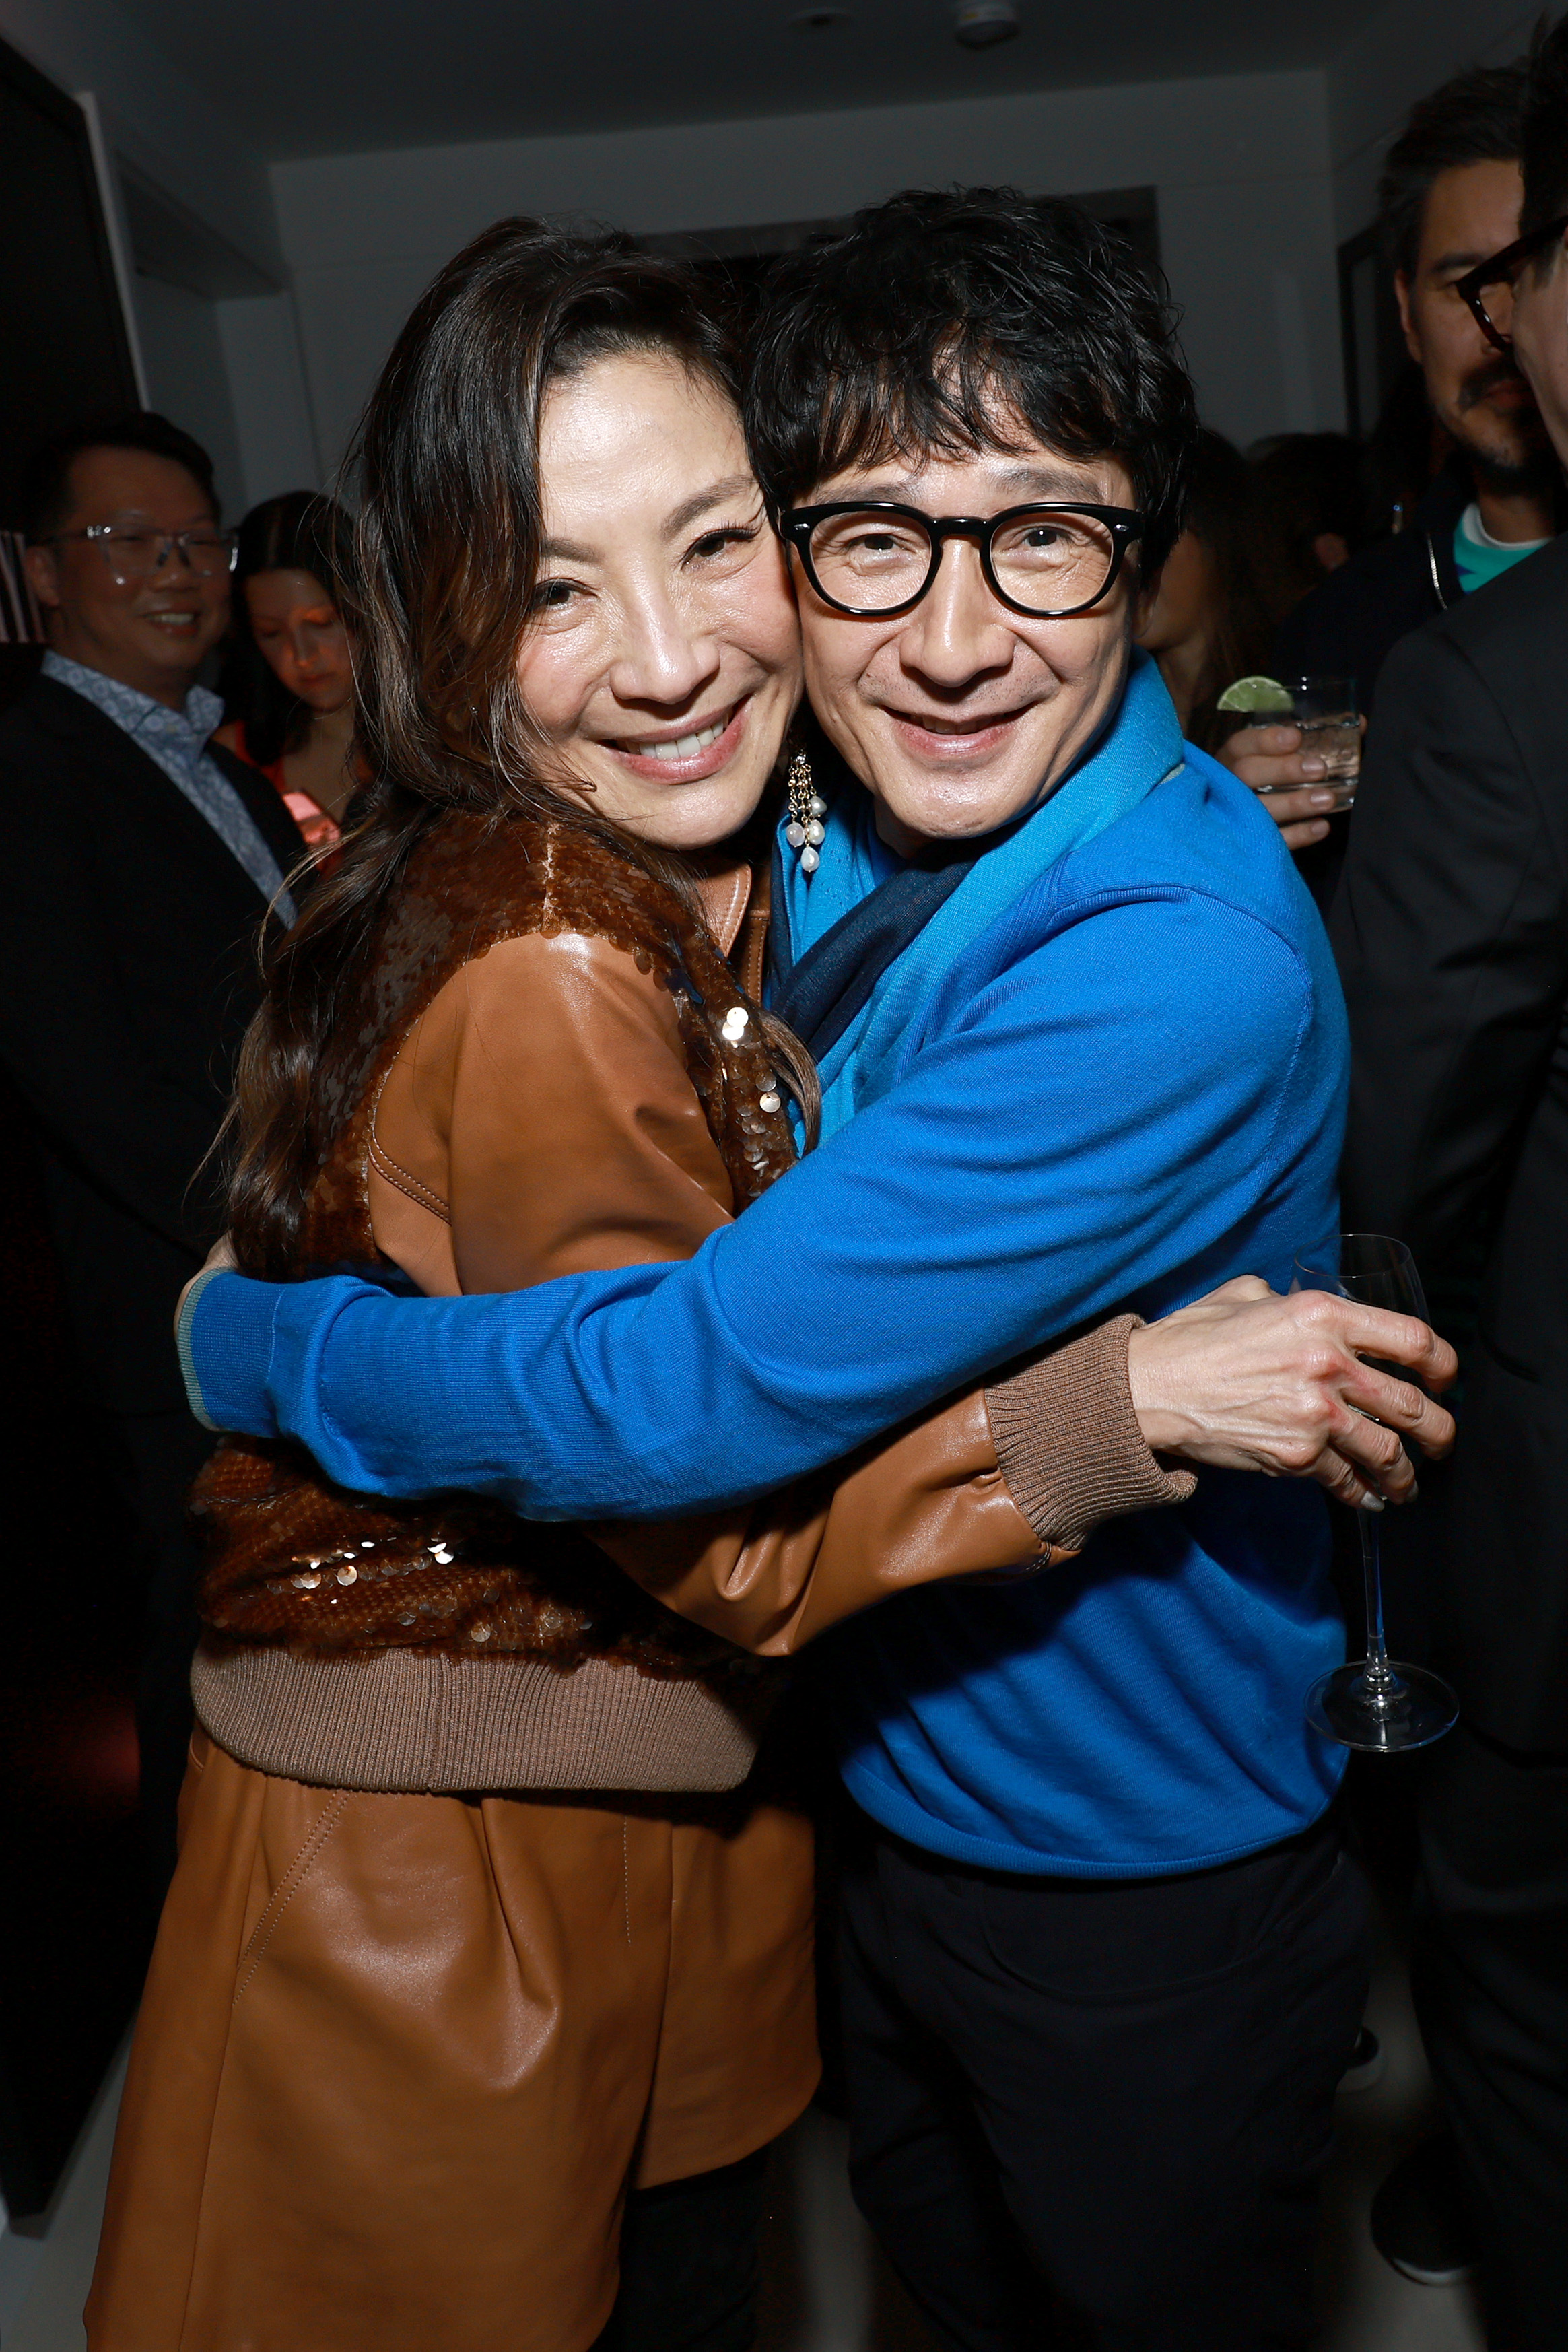 Michelle Yeoh and Ke Huy Quan pose as Vanity Fair and Richard Mille host a private cocktail party honoring A24’s “Everything Everywhere All at Once” in Los Angeles at Mandarin Oriental Residences Beverly Hills on March 10, 2023 in Beverly Hills, California.